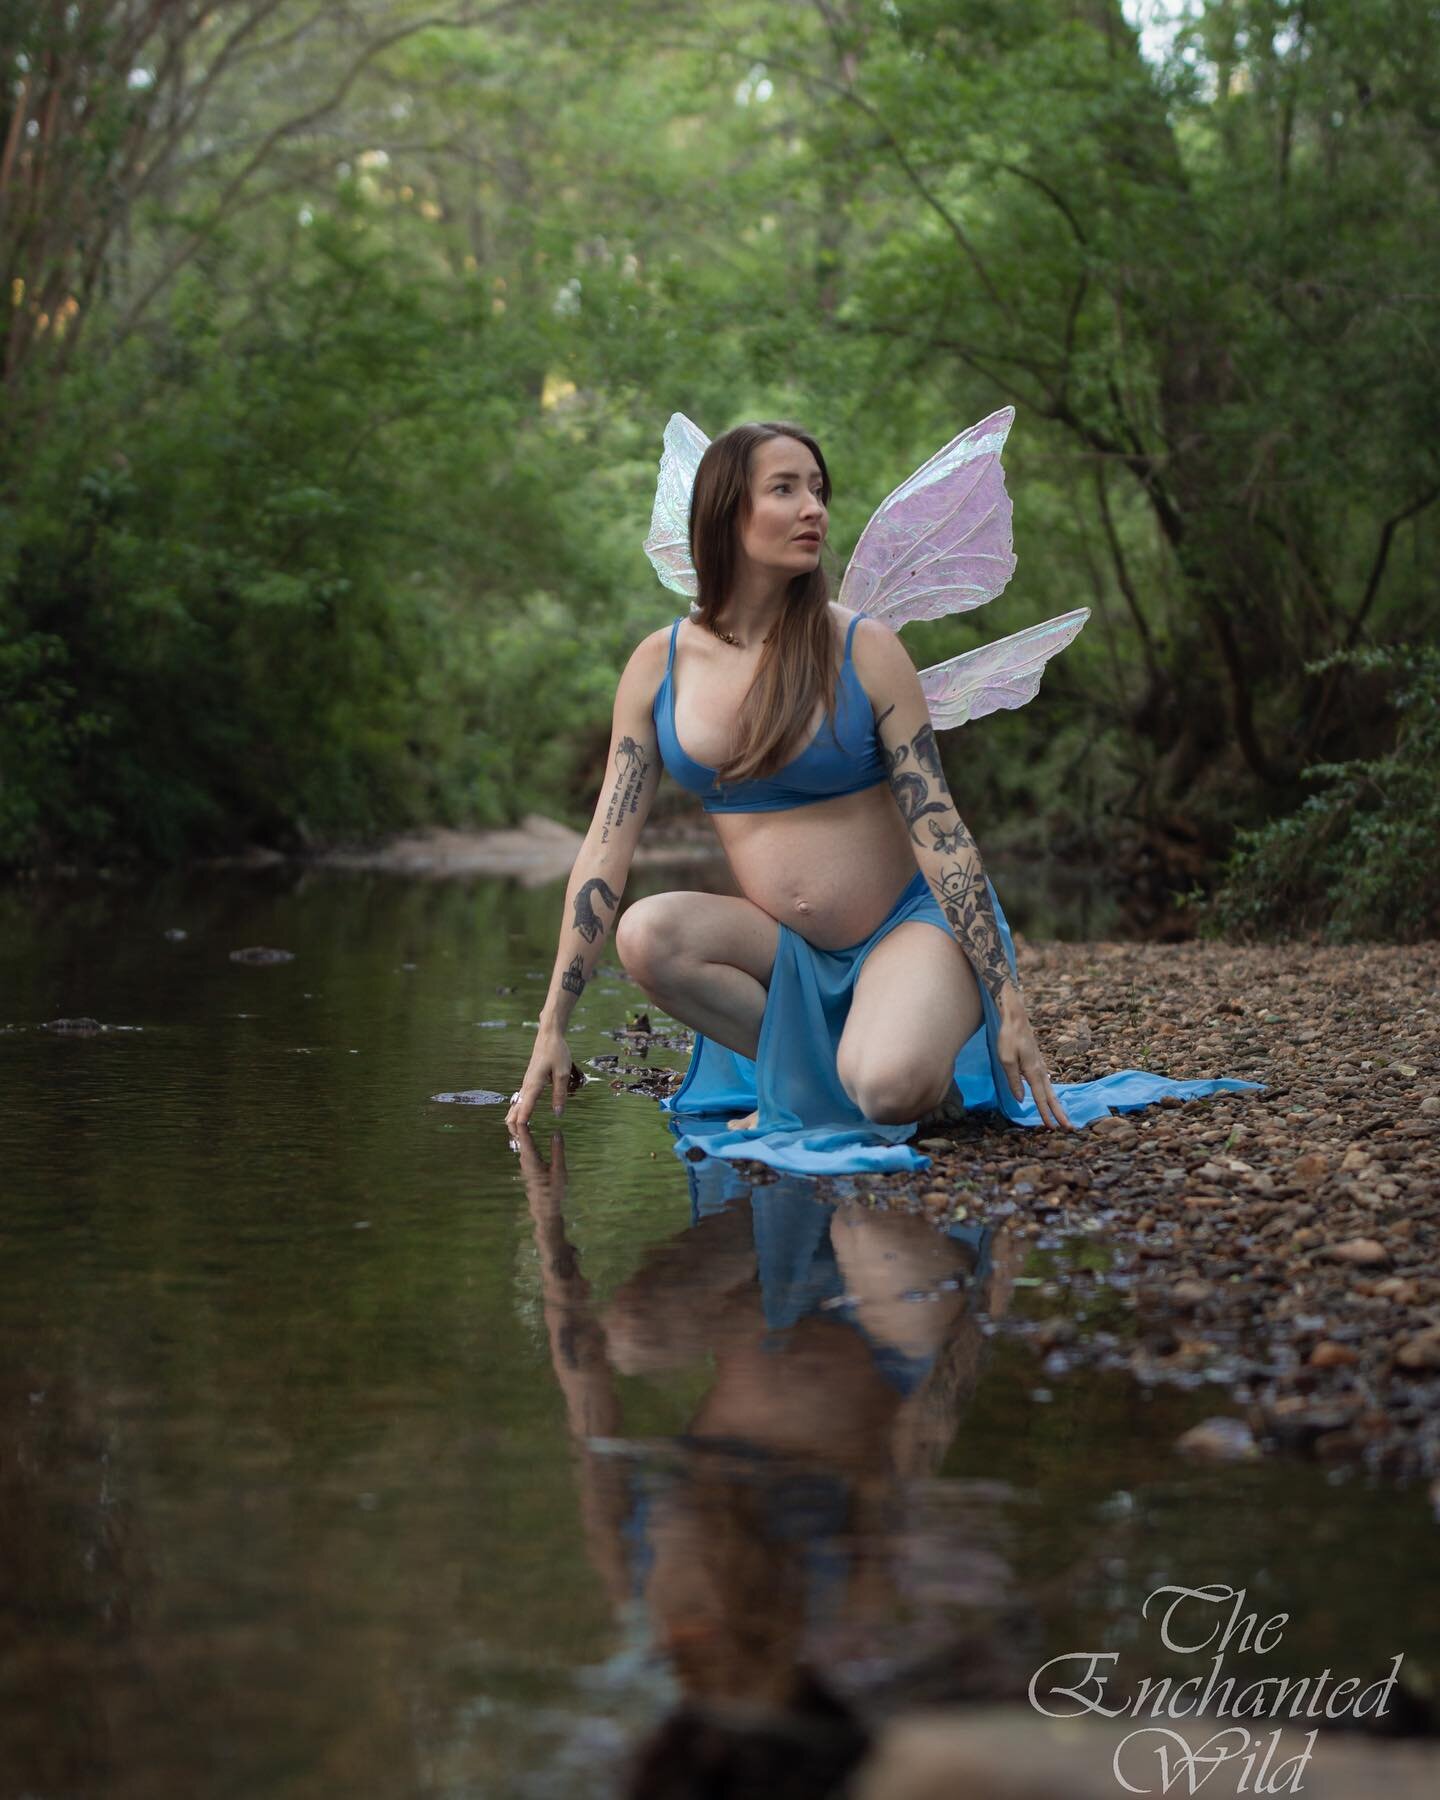 I love this faerie momma and I am so excited to meet the magical little one! Loved this day giggling together in nature and making magic. 
Was great to finally shoot these custom wings I made for her years ago in my old style, will probably never mak